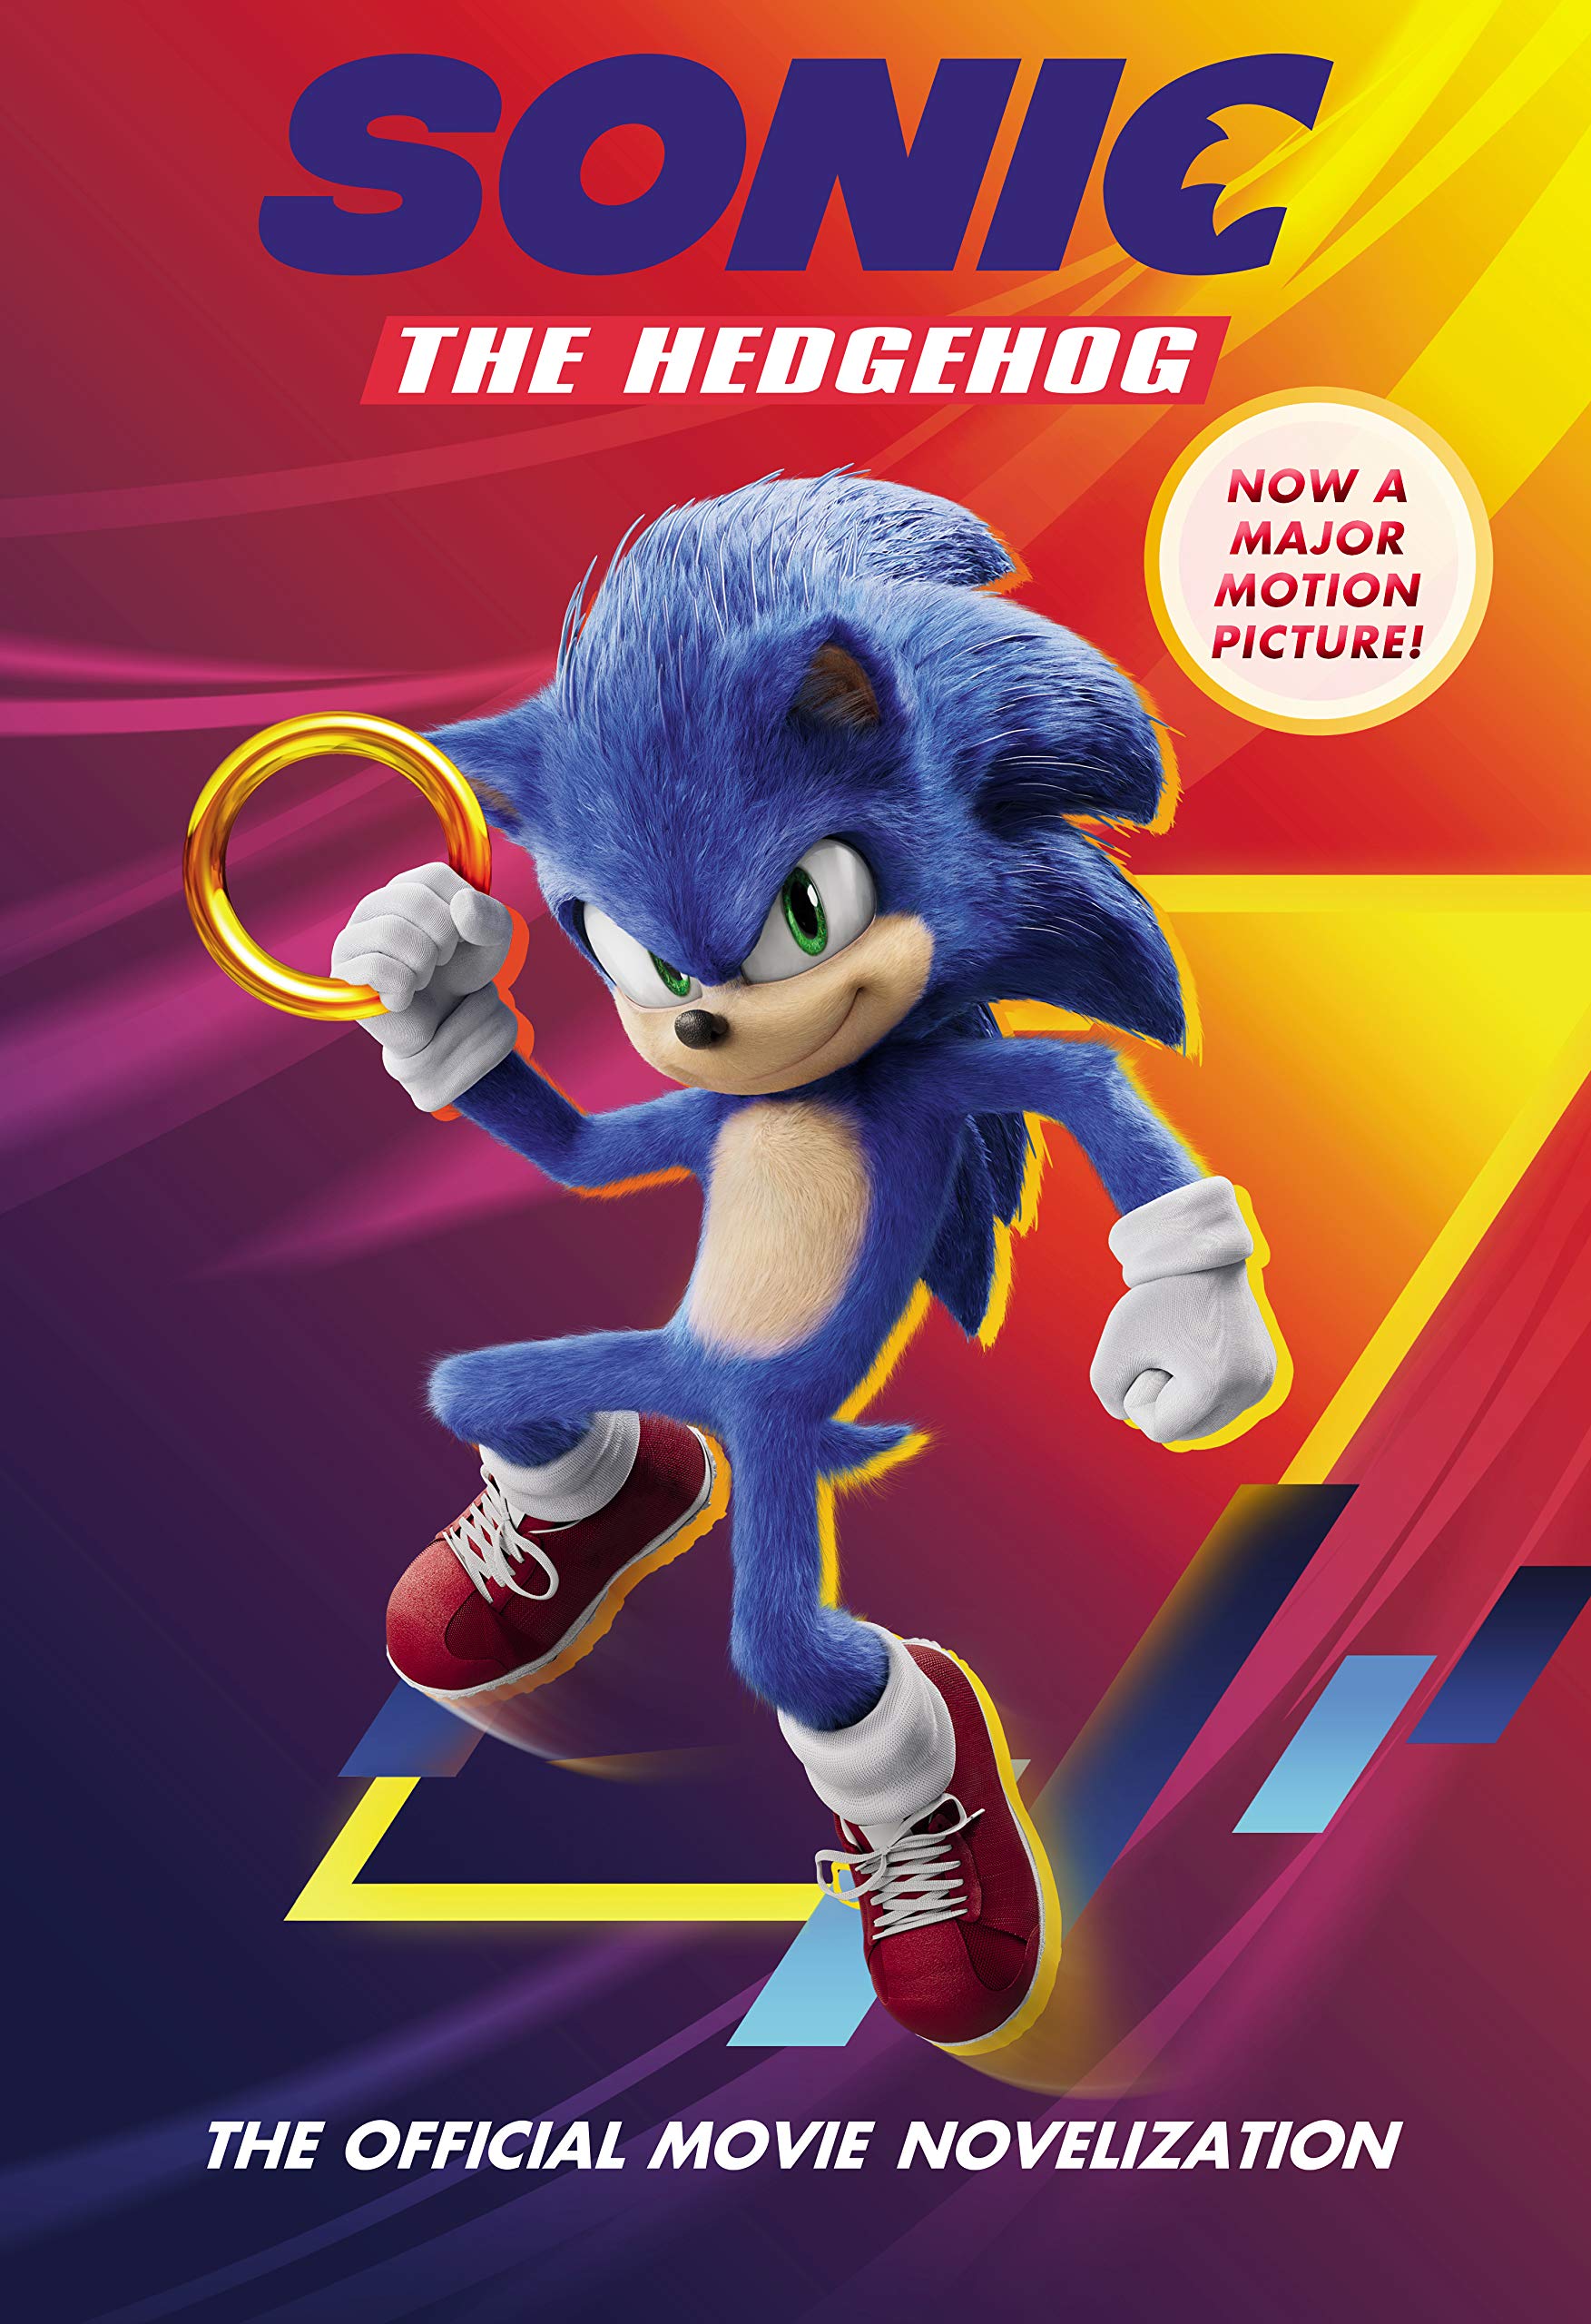 Sonic the Hedgehog: Official Game Guide, Sonic Wiki Zone